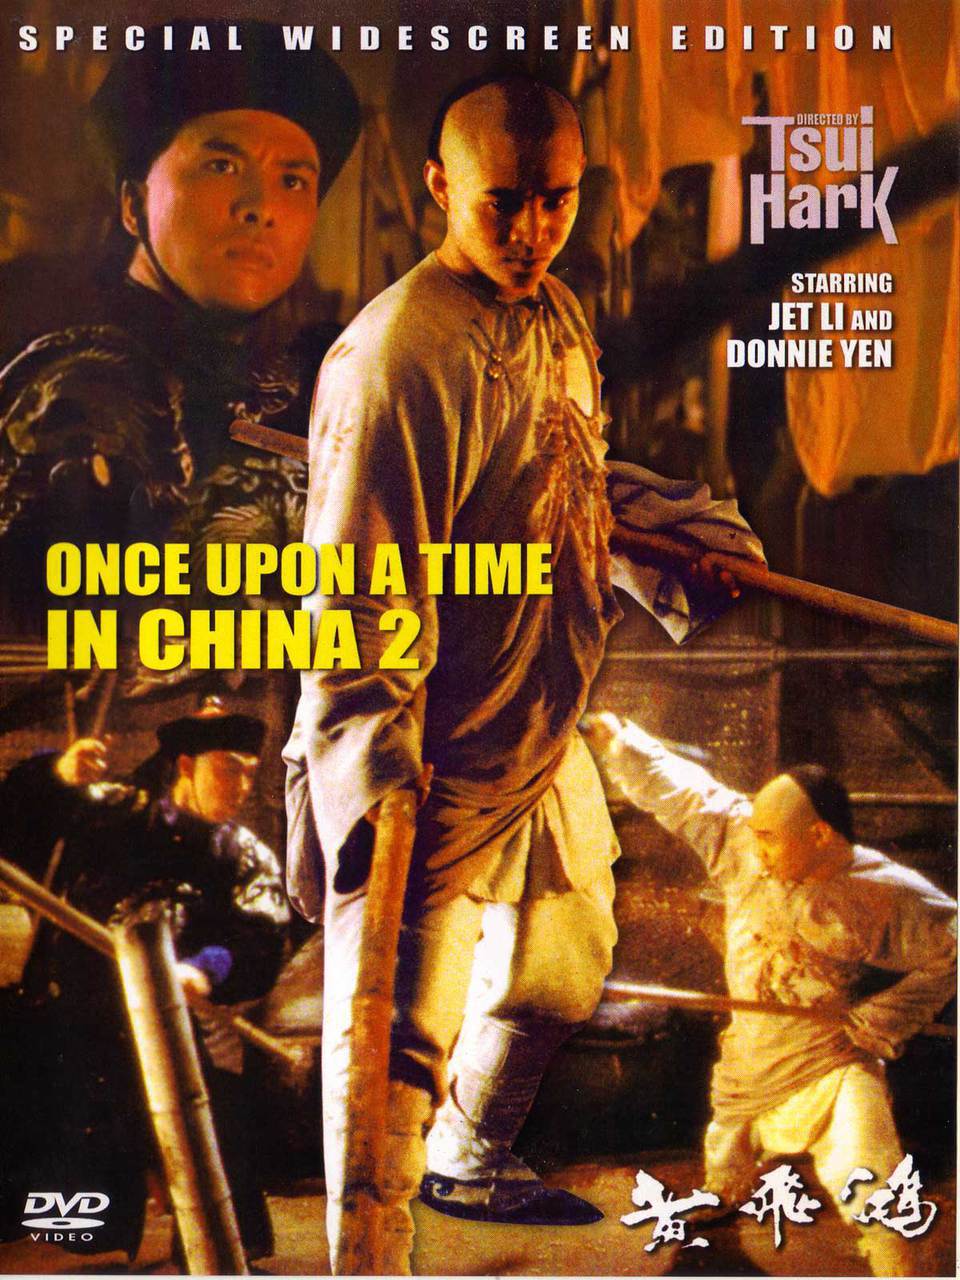 Once Upon A Time in China #2 DVD